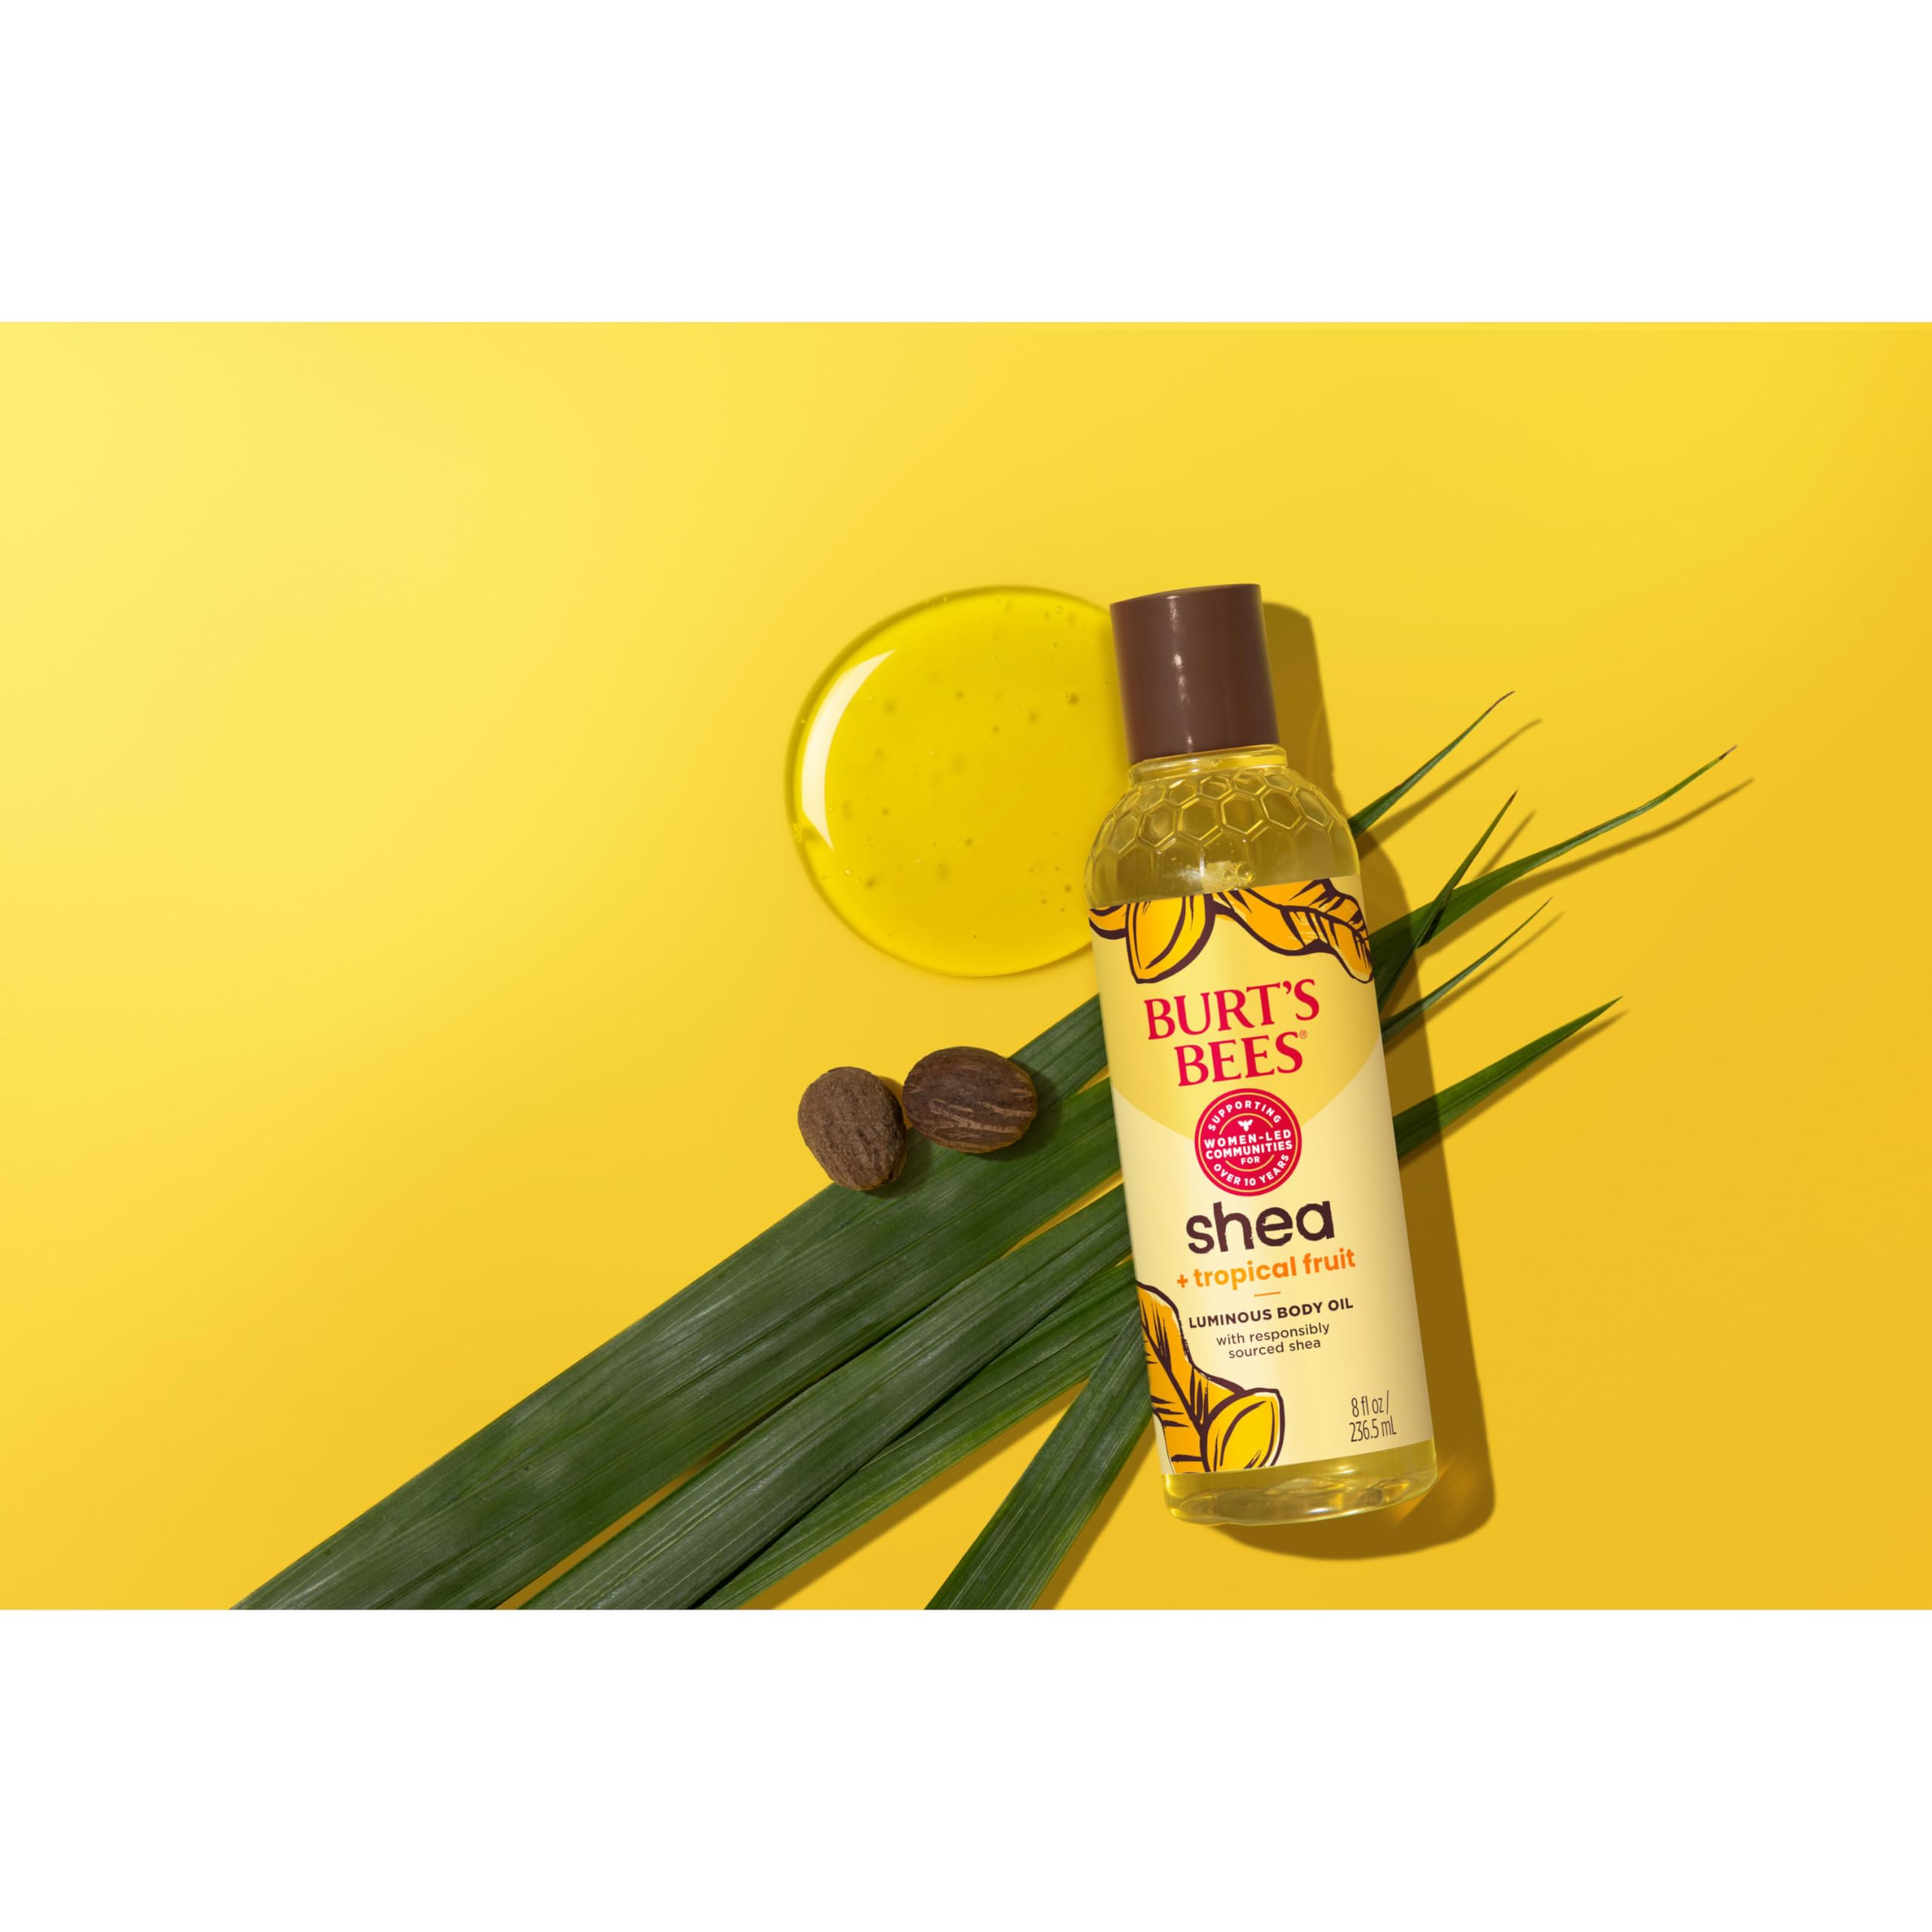 Burt's Bees Shea + Tropical Fruit Luminous Body Oil, Stocking Stuffers with Indulgent Antioxidant & Vitamin Rich Formula, Skincare Christmas Gifts, 8 oz. (Packaging May Vary)